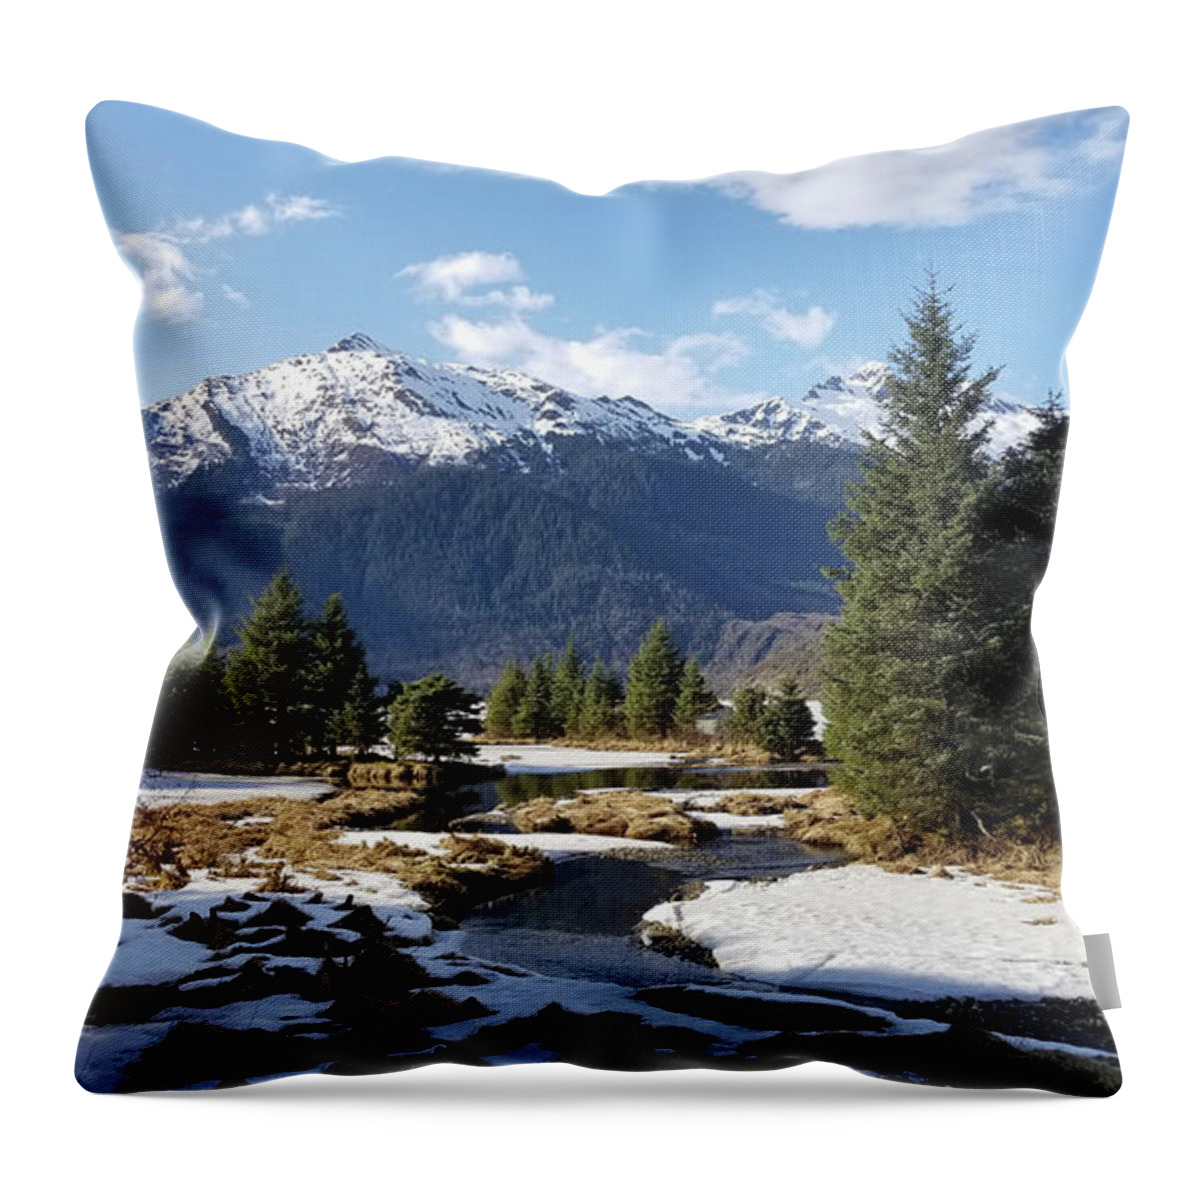 #alaska #juneau #ak #cruise #tours #vacation #peaceful #mendenhallglacier #glacier #capitalcity #snow #cold #clouds #postcard #mtmcginnis #dredgelakes #spring Throw Pillow featuring the photograph Spring at Mt. McGinnis by Charles Vice